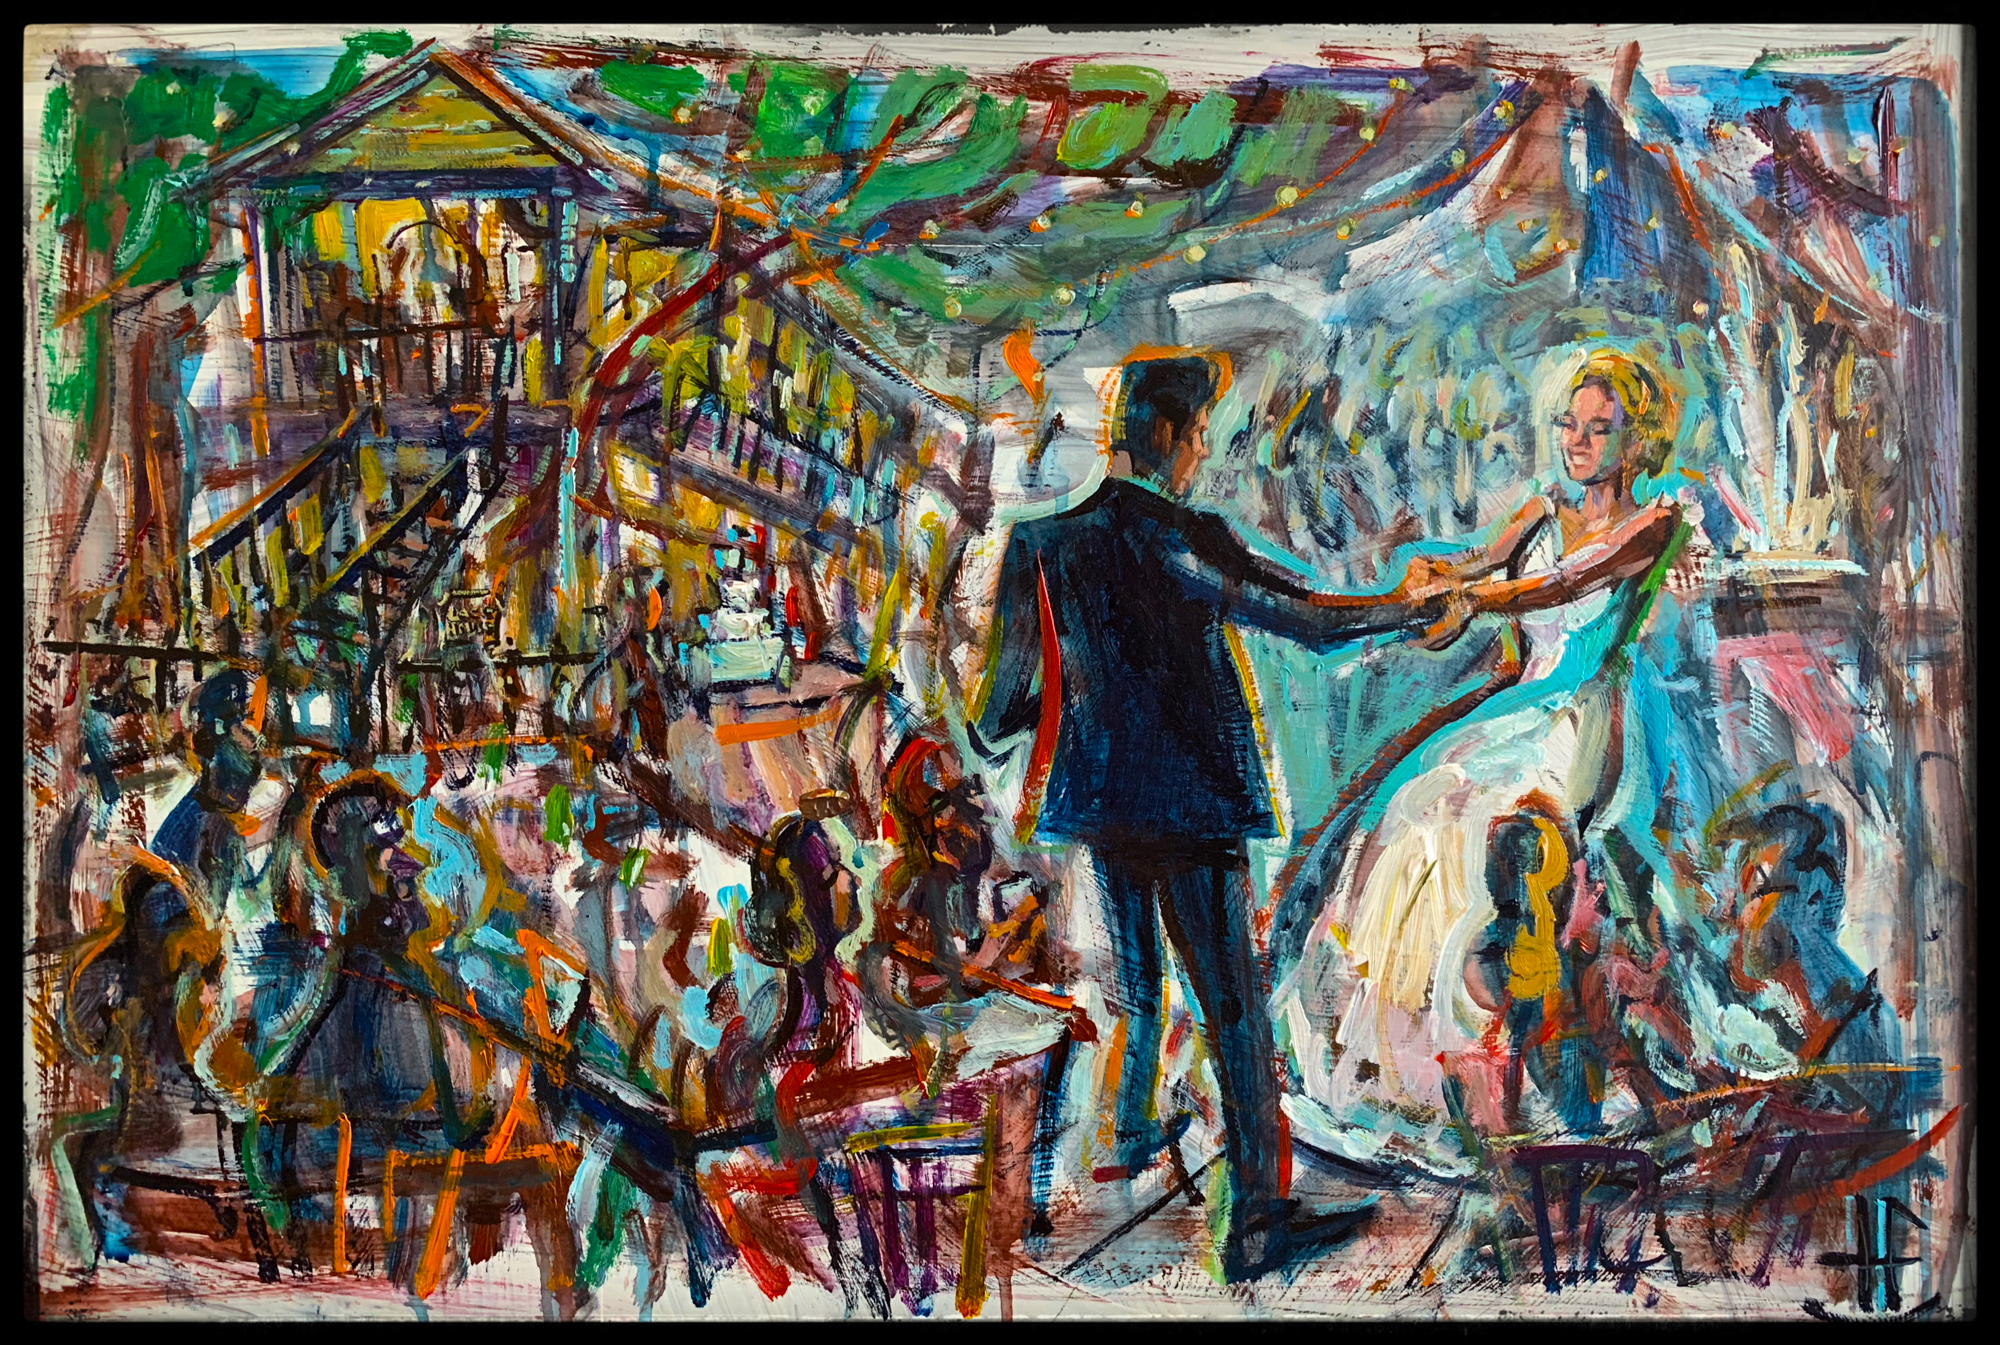 Trahern makes a point of setting up his easel in places where he can not only get a sense of the action swirling around him but is also visible and accessible to the people in attendance. Trahern says, “Painting for myself has allowed me to stretch my wings. I feel like my style is still evolving.”  Lace House Wedding Reception, 20” x 30”, acrylic on gessoed panel, 2022.